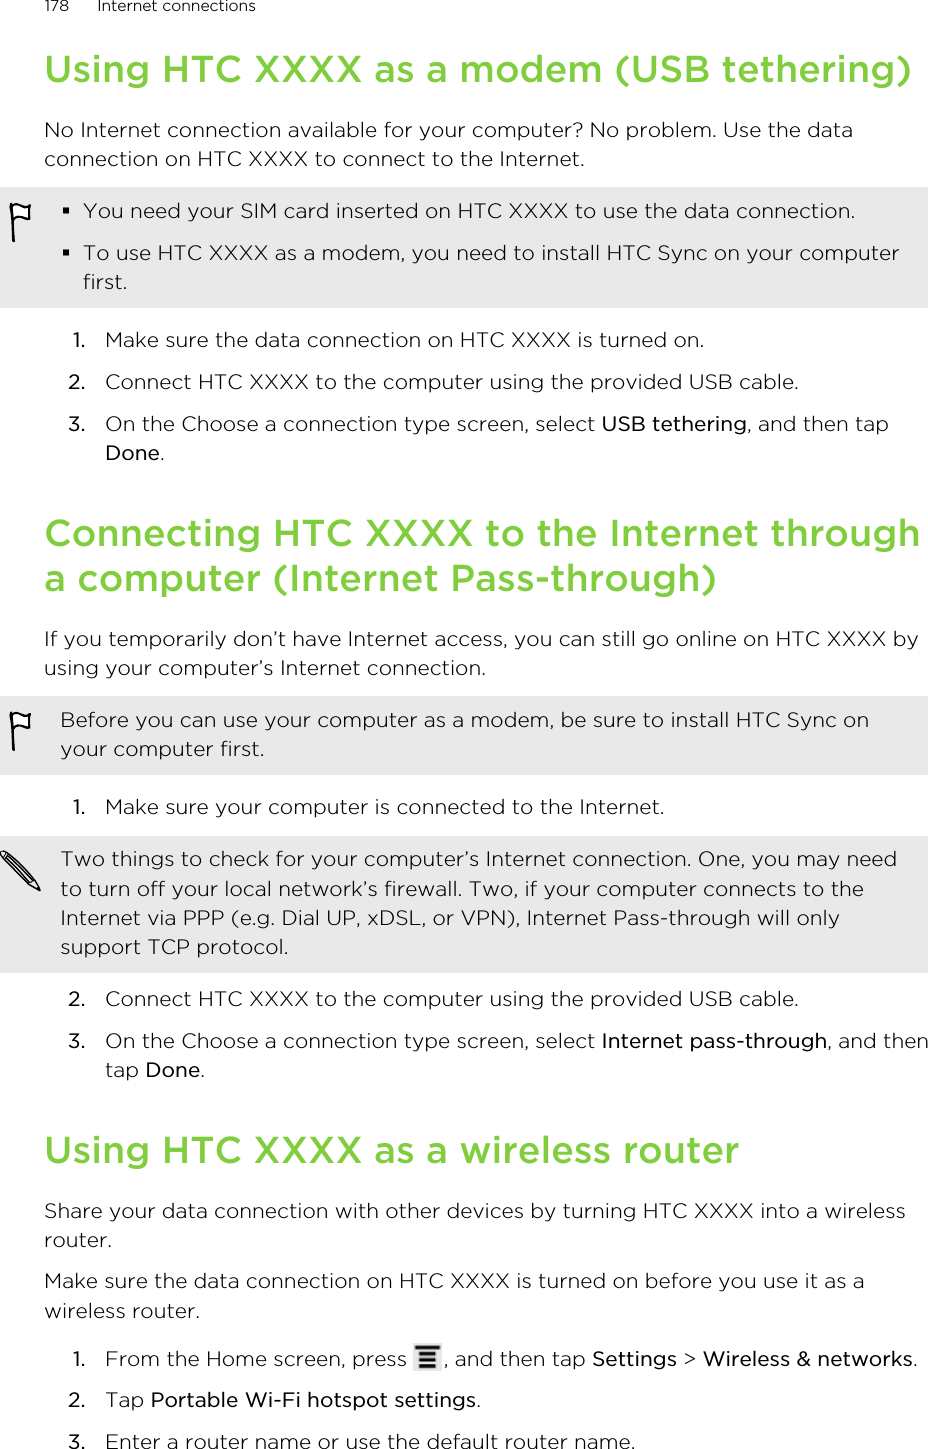 Using HTC XXXX as a modem (USB tethering)No Internet connection available for your computer? No problem. Use the dataconnection on HTC XXXX to connect to the Internet.§You need your SIM card inserted on HTC XXXX to use the data connection.§To use HTC XXXX as a modem, you need to install HTC Sync on your computerfirst.1. Make sure the data connection on HTC XXXX is turned on.2. Connect HTC XXXX to the computer using the provided USB cable.3. On the Choose a connection type screen, select USB tethering, and then tapDone.Connecting HTC XXXX to the Internet througha computer (Internet Pass-through)If you temporarily don’t have Internet access, you can still go online on HTC XXXX byusing your computer’s Internet connection.Before you can use your computer as a modem, be sure to install HTC Sync onyour computer first.1. Make sure your computer is connected to the Internet. Two things to check for your computer’s Internet connection. One, you may needto turn off your local network’s firewall. Two, if your computer connects to theInternet via PPP (e.g. Dial UP, xDSL, or VPN), Internet Pass-through will onlysupport TCP protocol.2. Connect HTC XXXX to the computer using the provided USB cable.3. On the Choose a connection type screen, select Internet pass-through, and thentap Done.Using HTC XXXX as a wireless routerShare your data connection with other devices by turning HTC XXXX into a wirelessrouter.Make sure the data connection on HTC XXXX is turned on before you use it as awireless router.1. From the Home screen, press  , and then tap Settings &gt; Wireless &amp; networks.2. Tap Portable Wi-Fi hotspot settings.3. Enter a router name or use the default router name.178 Internet connections